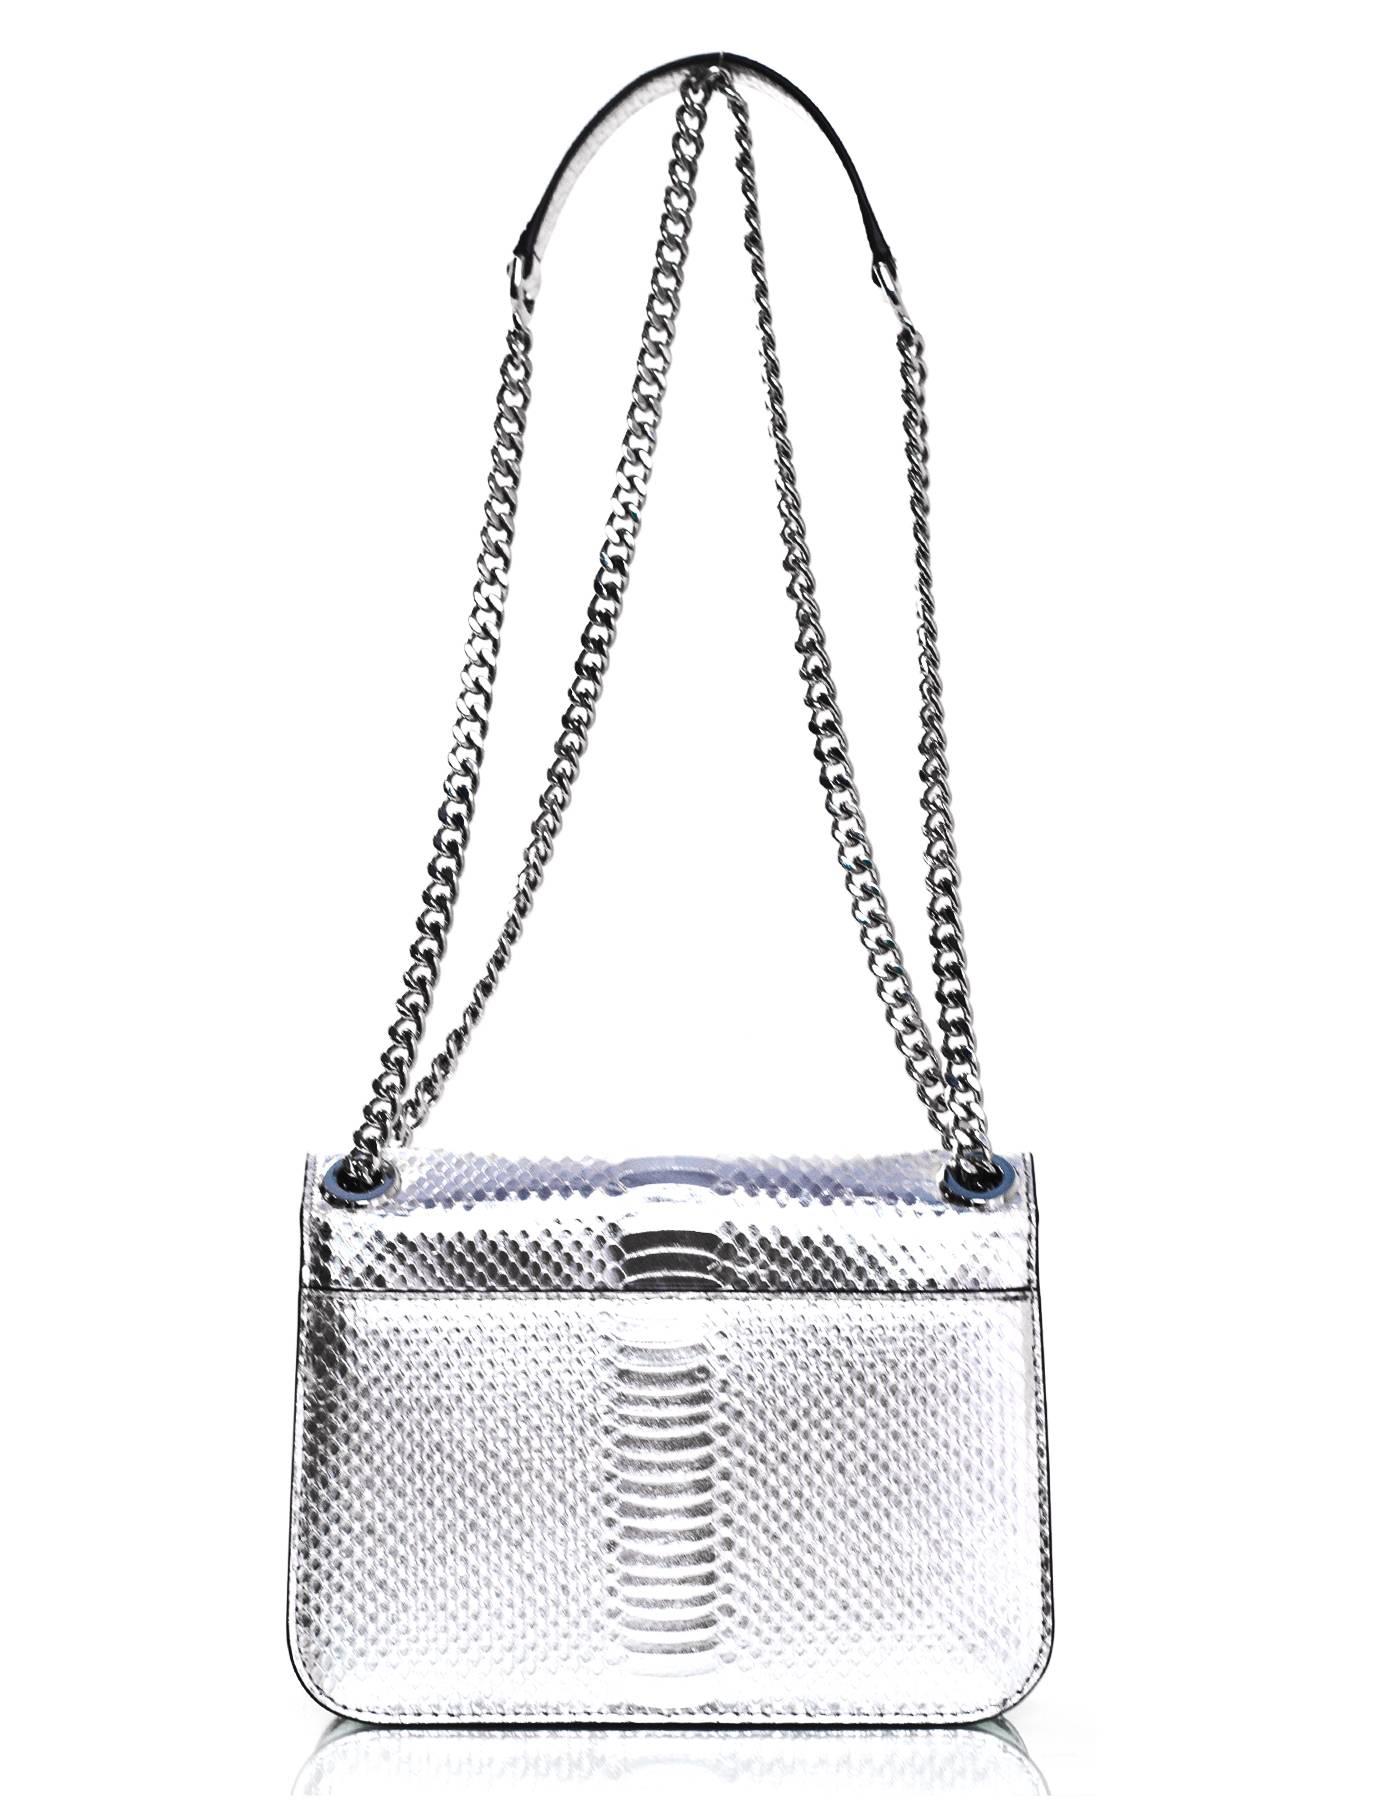 Michael Kors NEW Sloan Editor Silver Embossed Leather Flap Bag 
Features adjustable shoulder strap

Made In: China
Color: Silver
Hardware: Silvertone
Materials: Embossed leather
Lining: Silver logo printed textile
Closure/Opening: Flap top with S